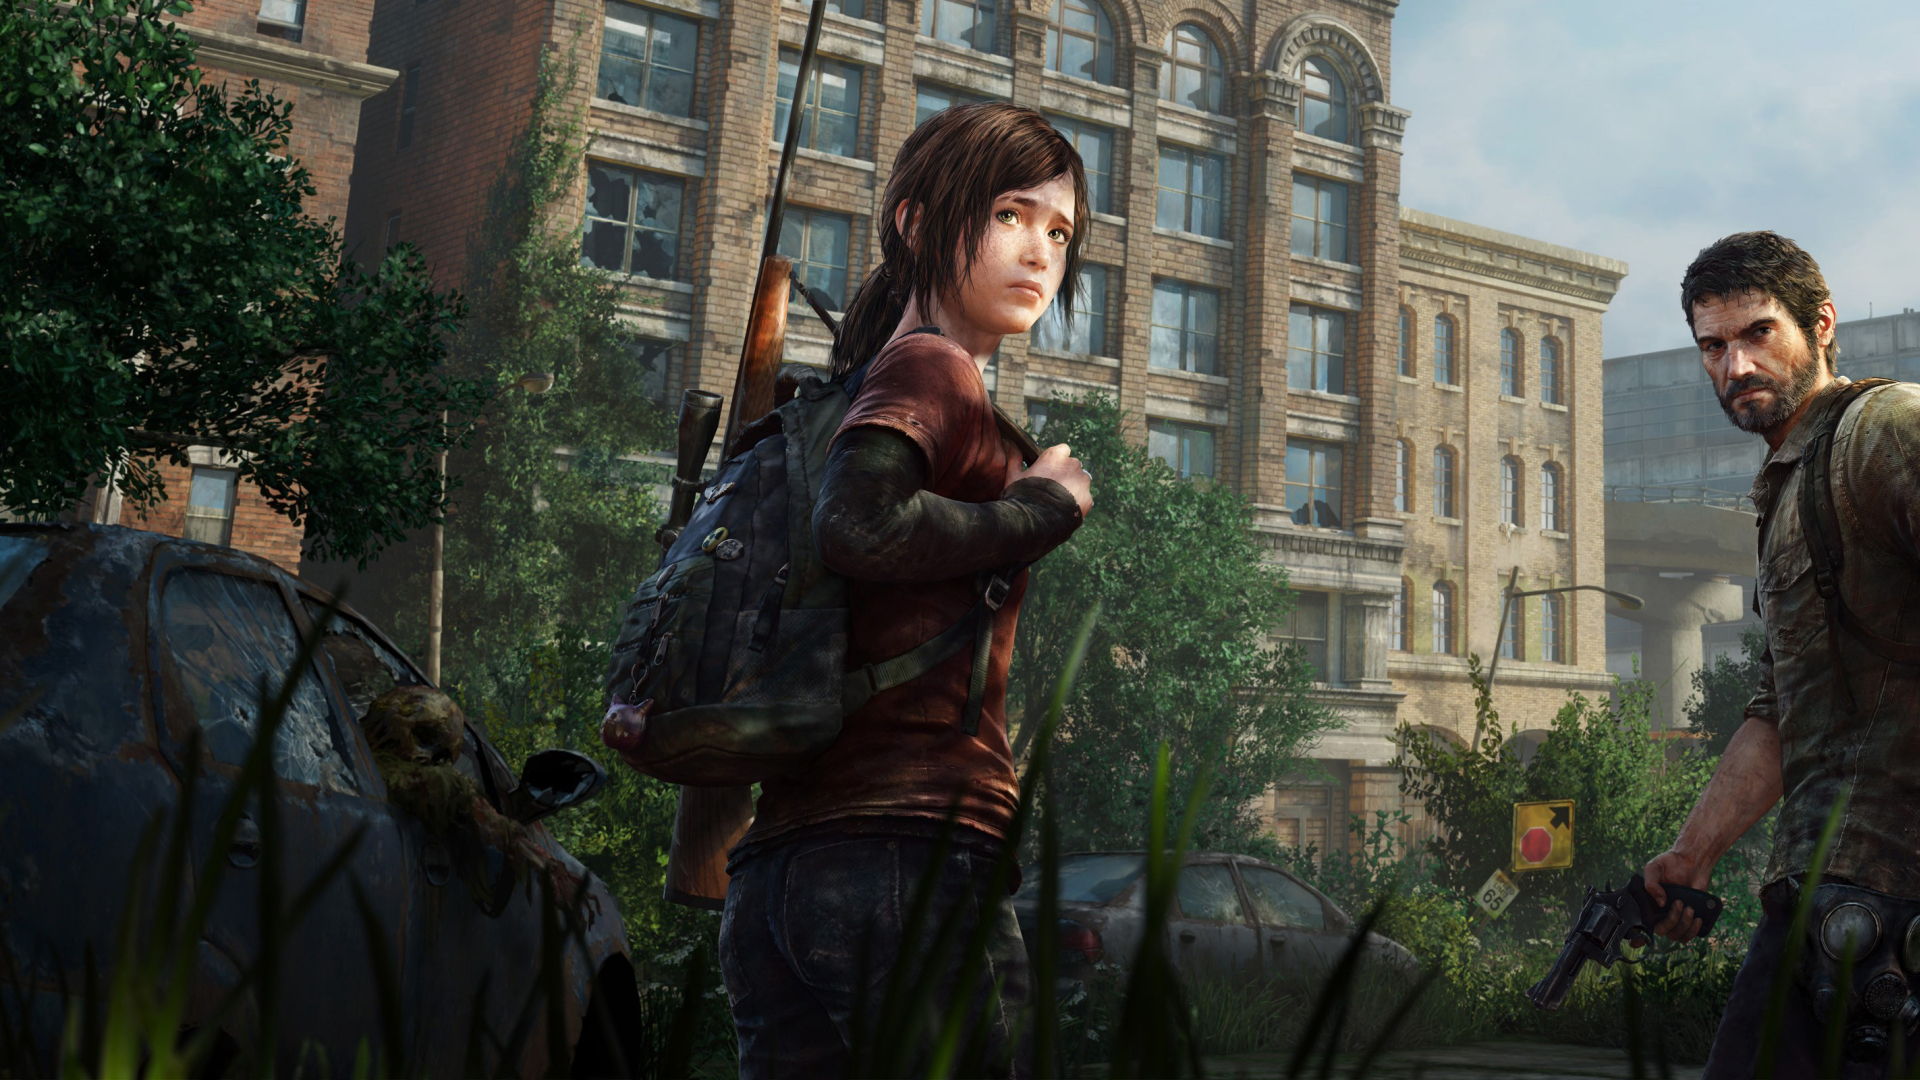 1920x1080 The Last Of Us 1080p Laptop Full Hd Wallpaper Hd Games 4k Wallpapers Images Photos And Background